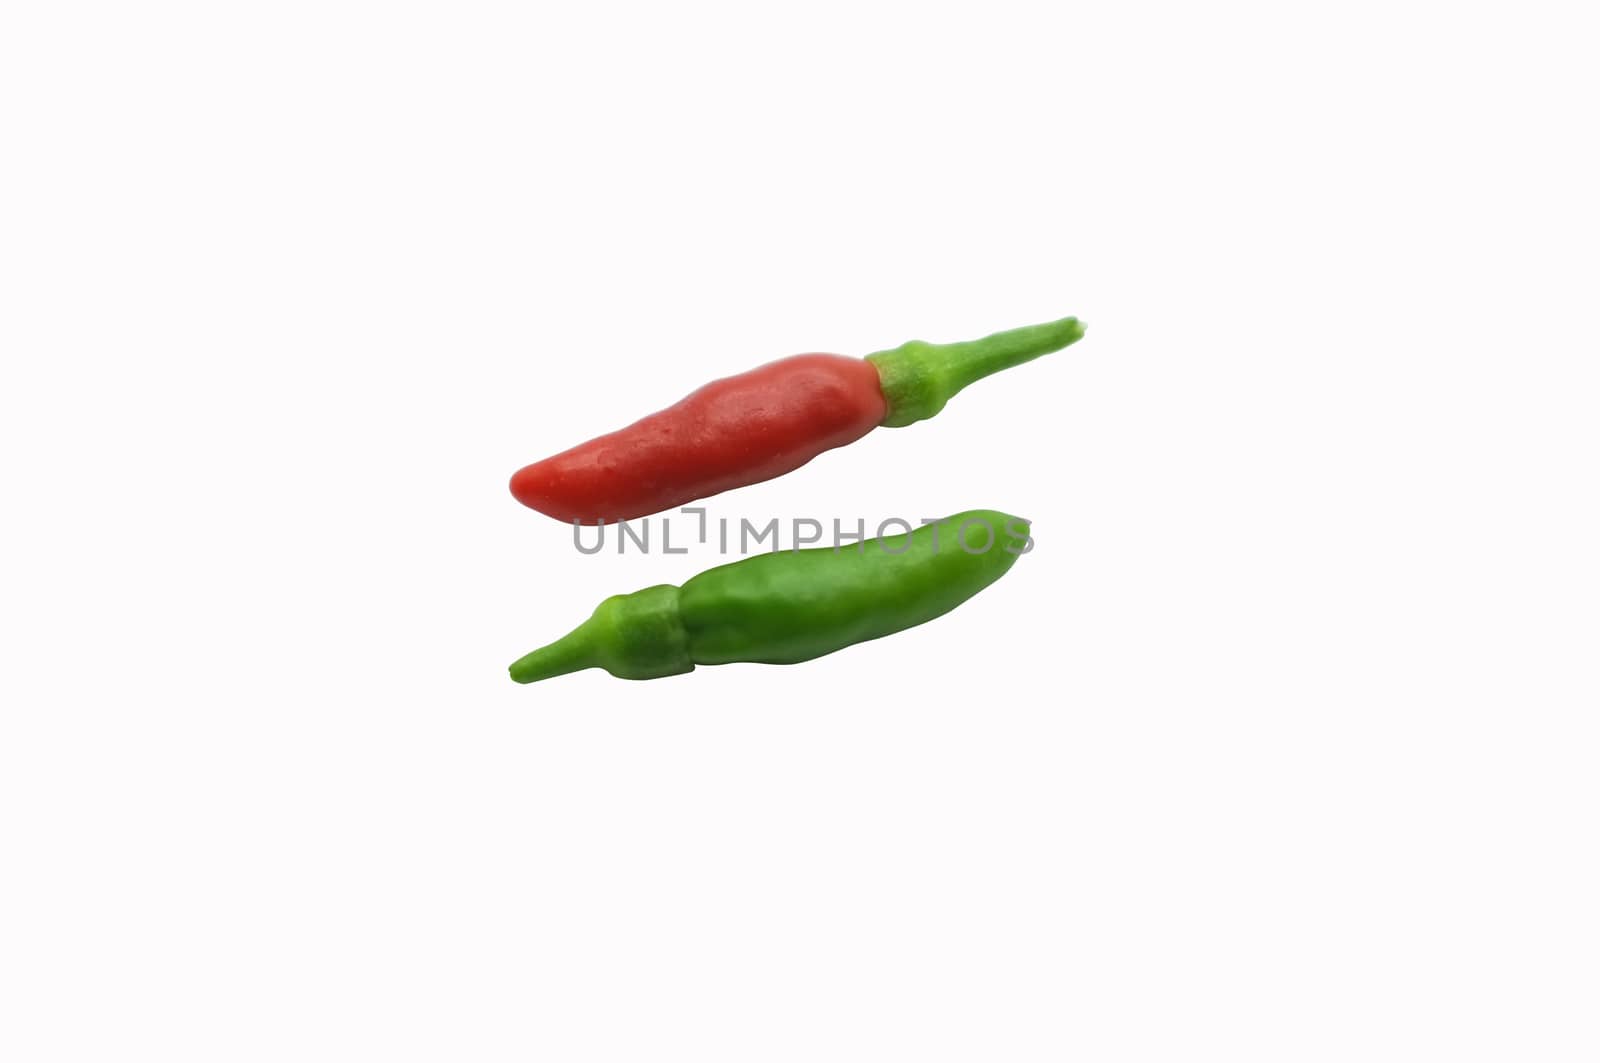 Thai chili pepper, red and green colors by Hepjam